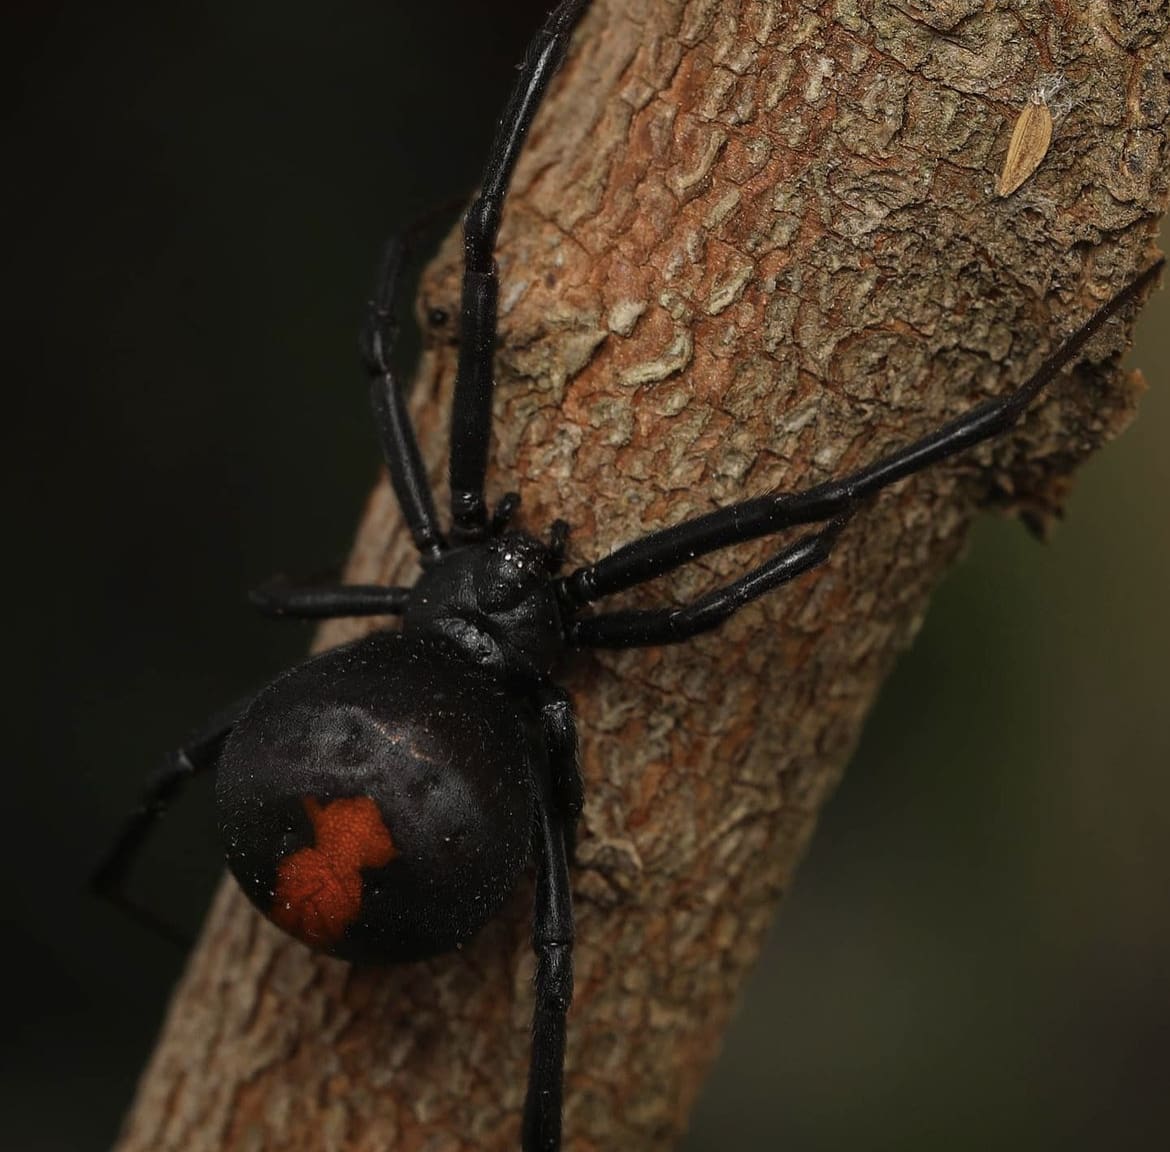 Deadly spiders of the world - Redback Spider